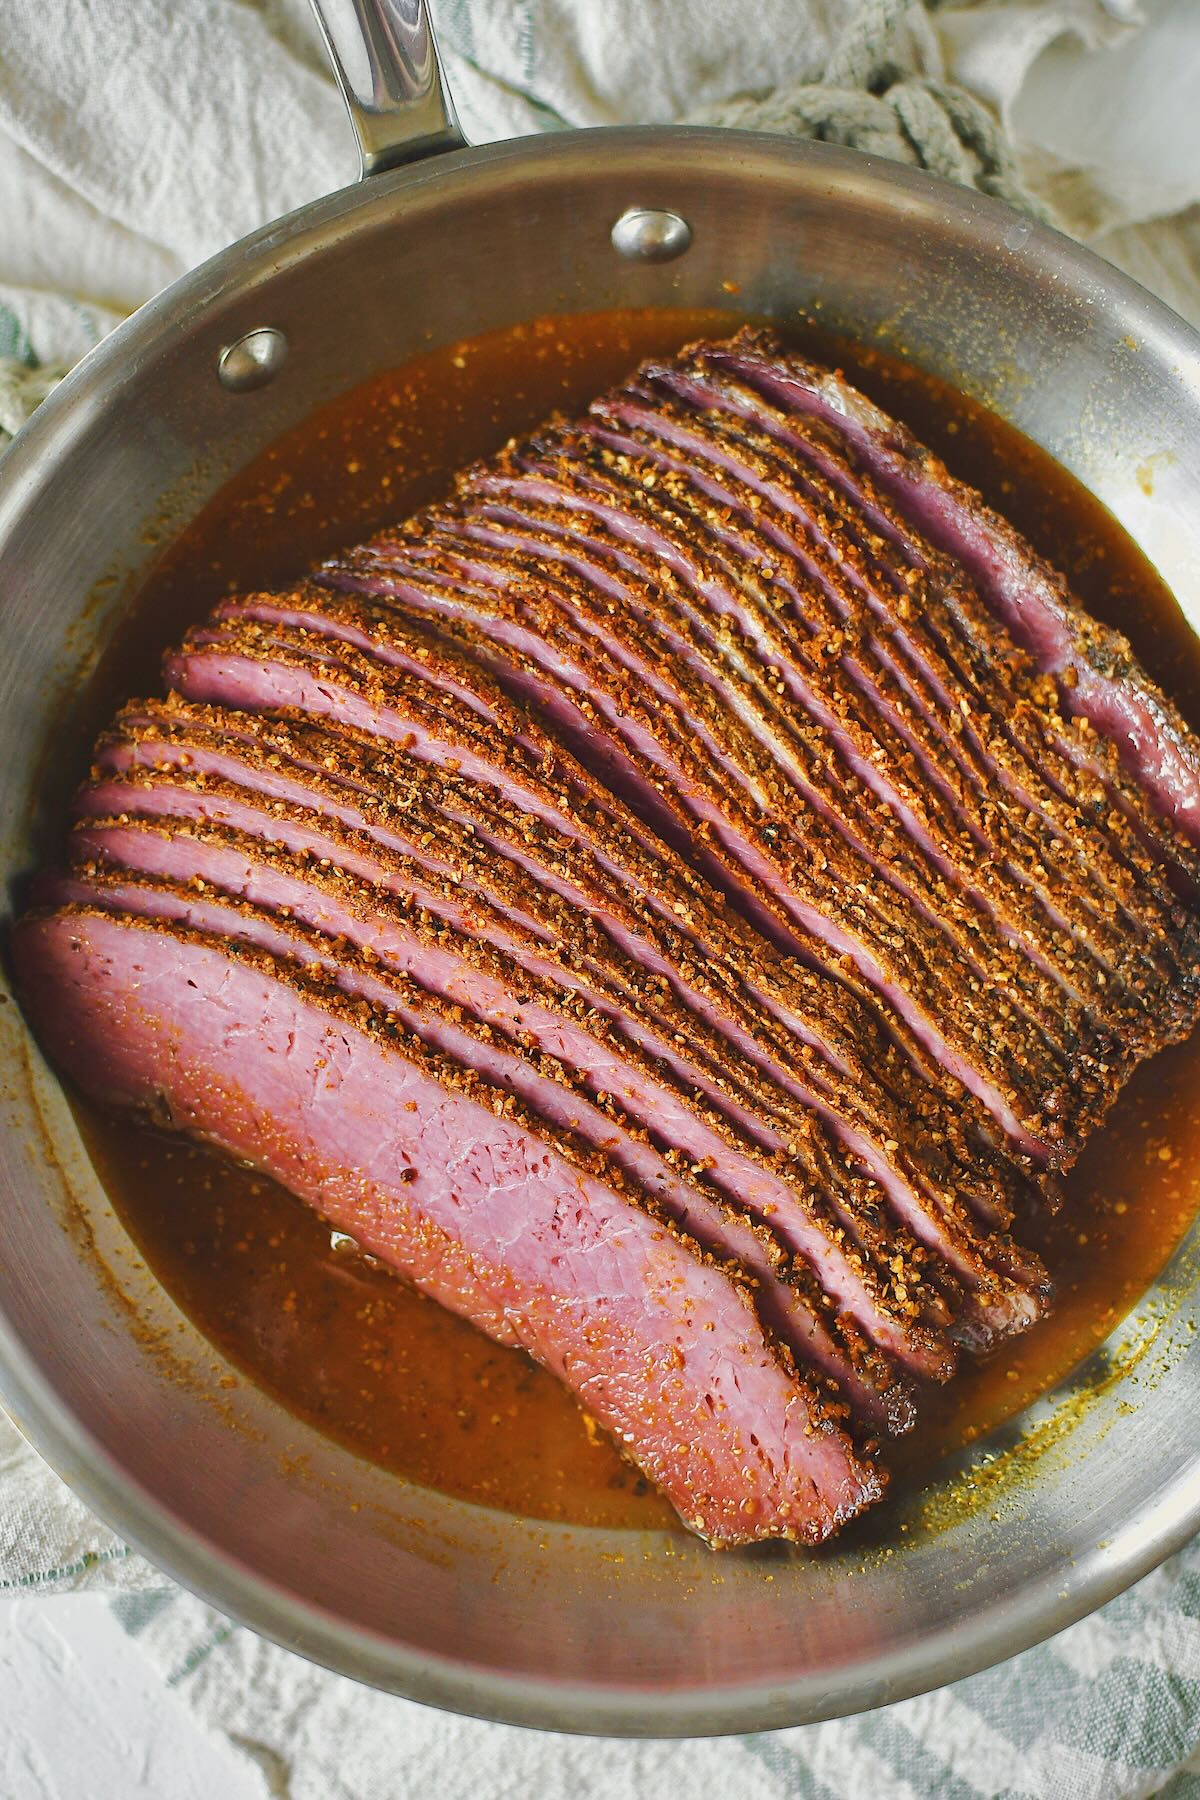 Gently steaming the pastrami to make pastrami reuben sandwiches.